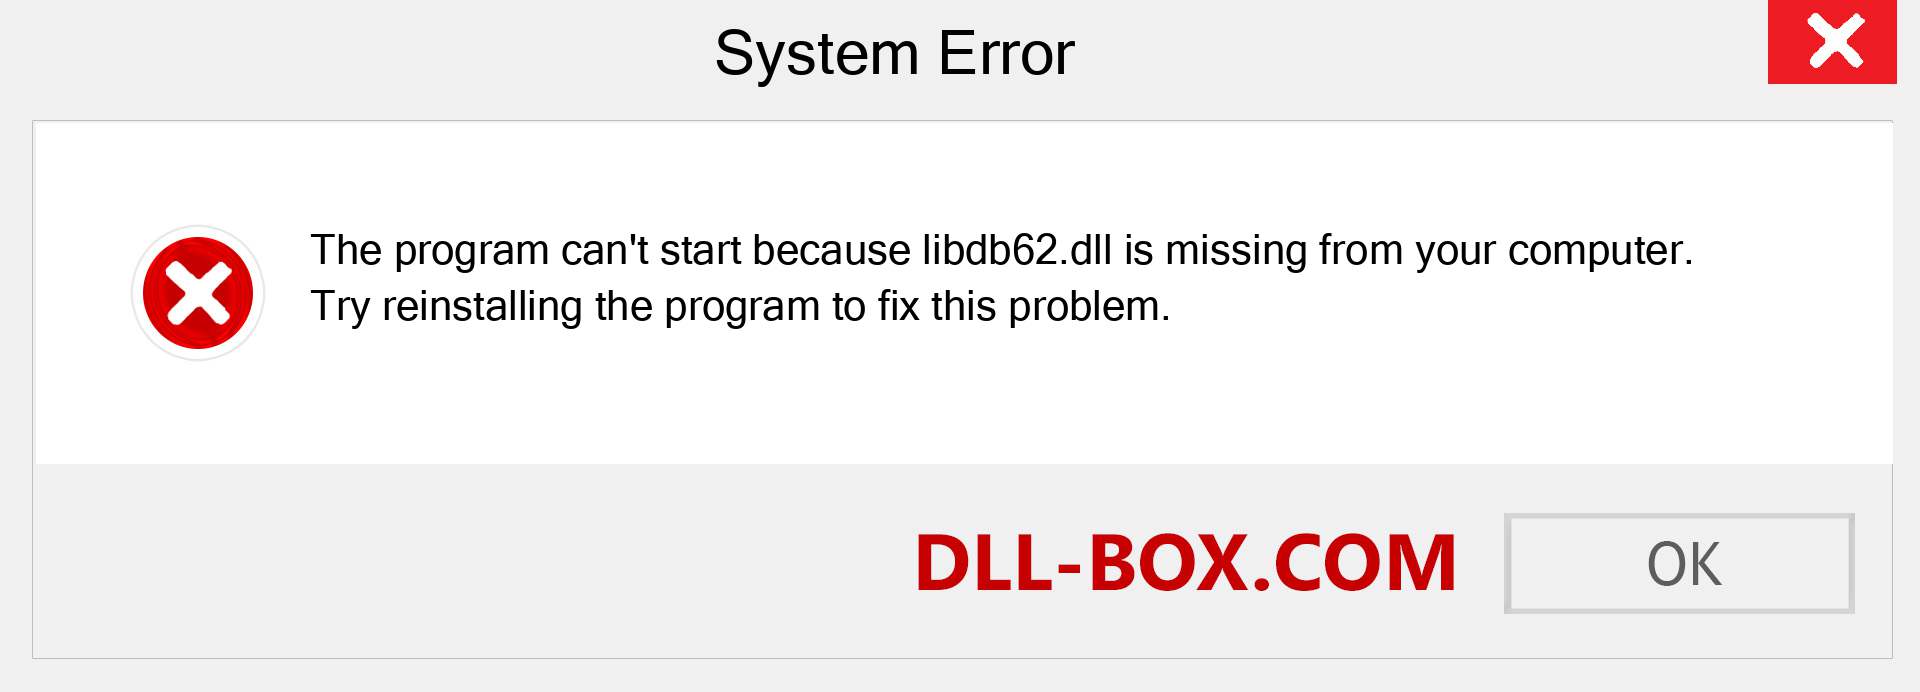  libdb62.dll file is missing?. Download for Windows 7, 8, 10 - Fix  libdb62 dll Missing Error on Windows, photos, images